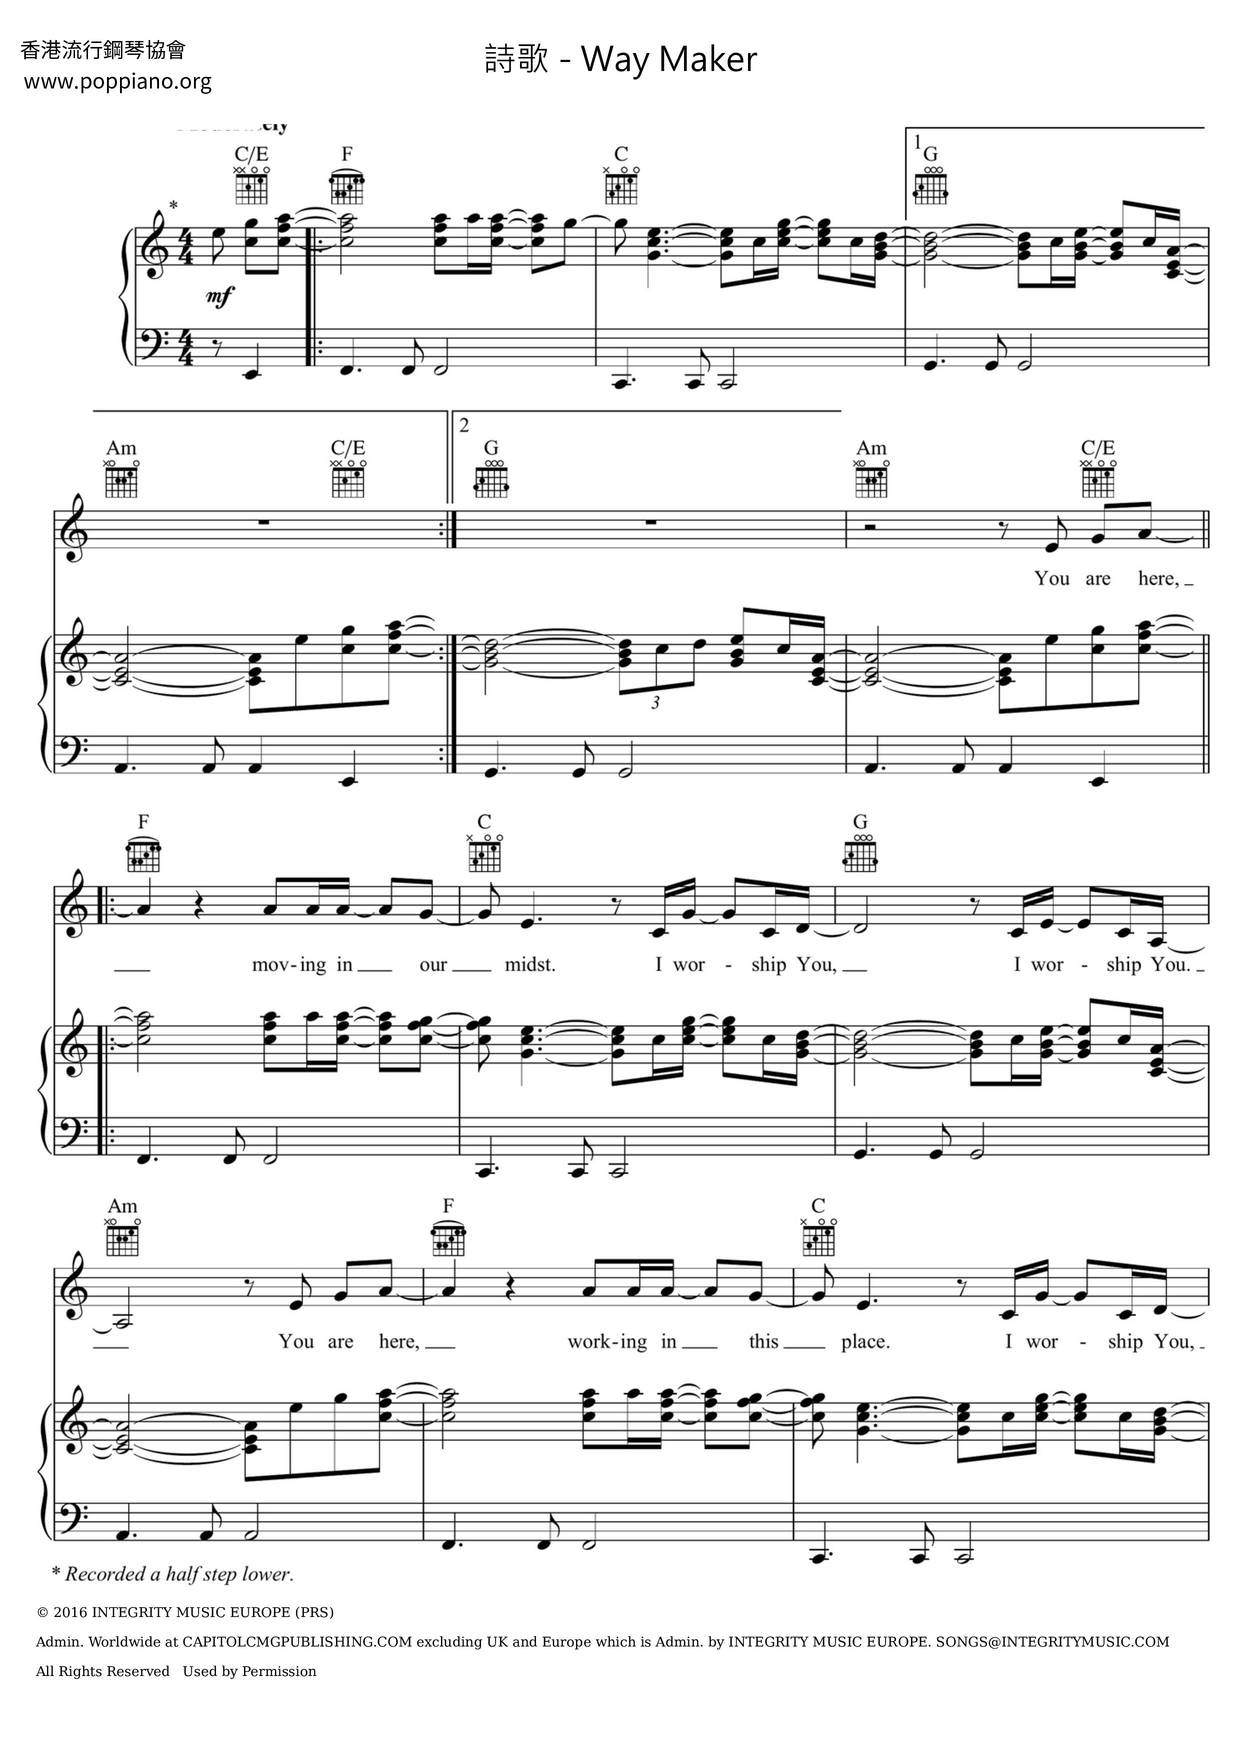 Way Maker sheet music for voice, piano or guitar (PDF)